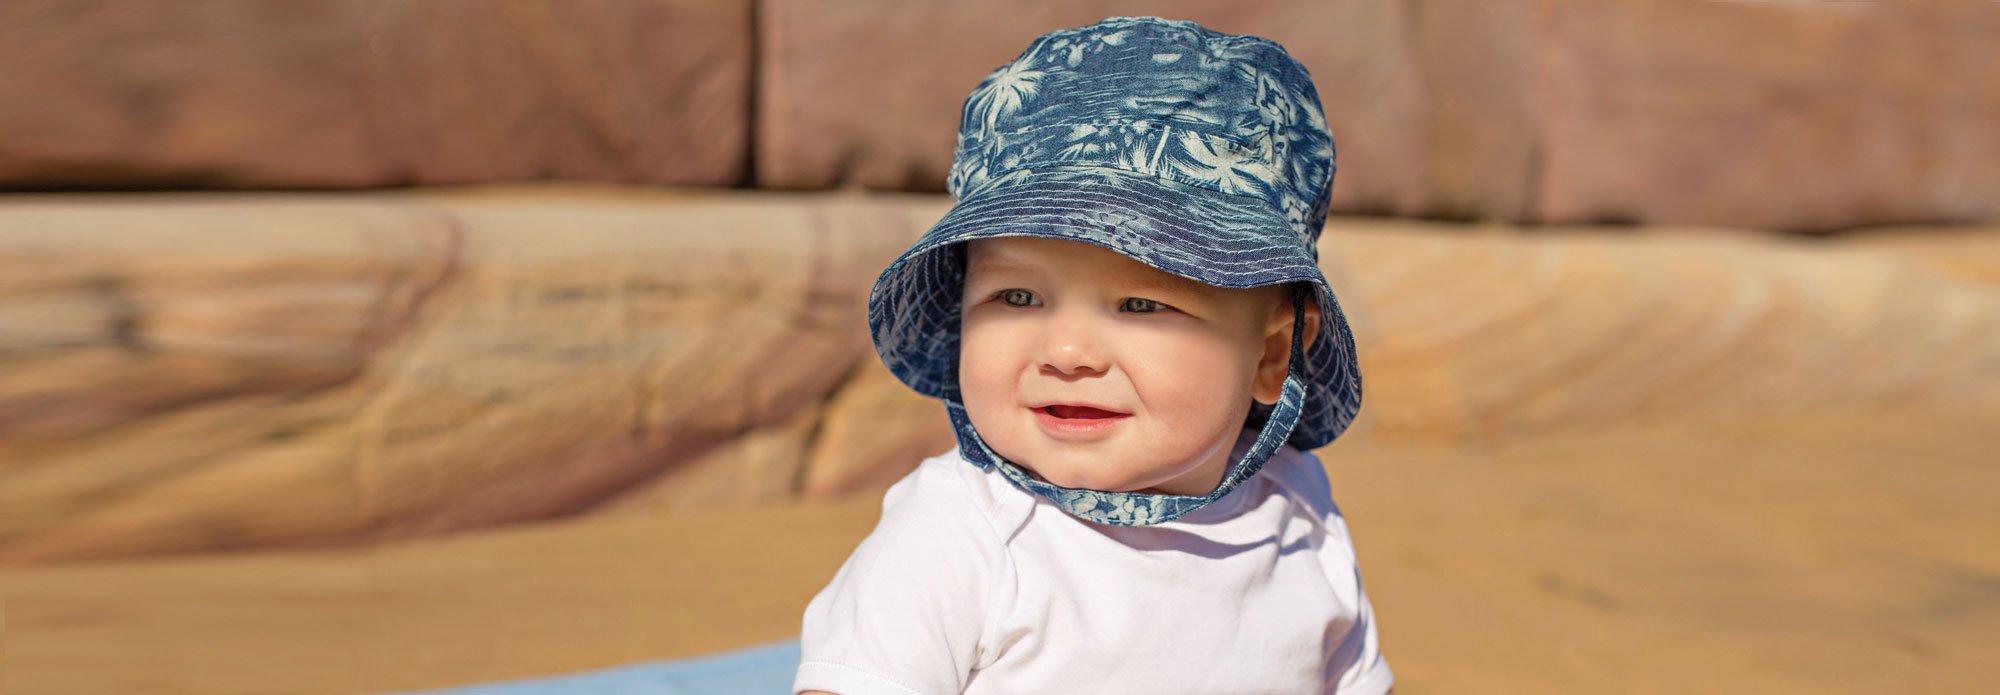 Sun Protection Hat for Kids with UPF 50+ - Safety Headgear - Discoverer  Series